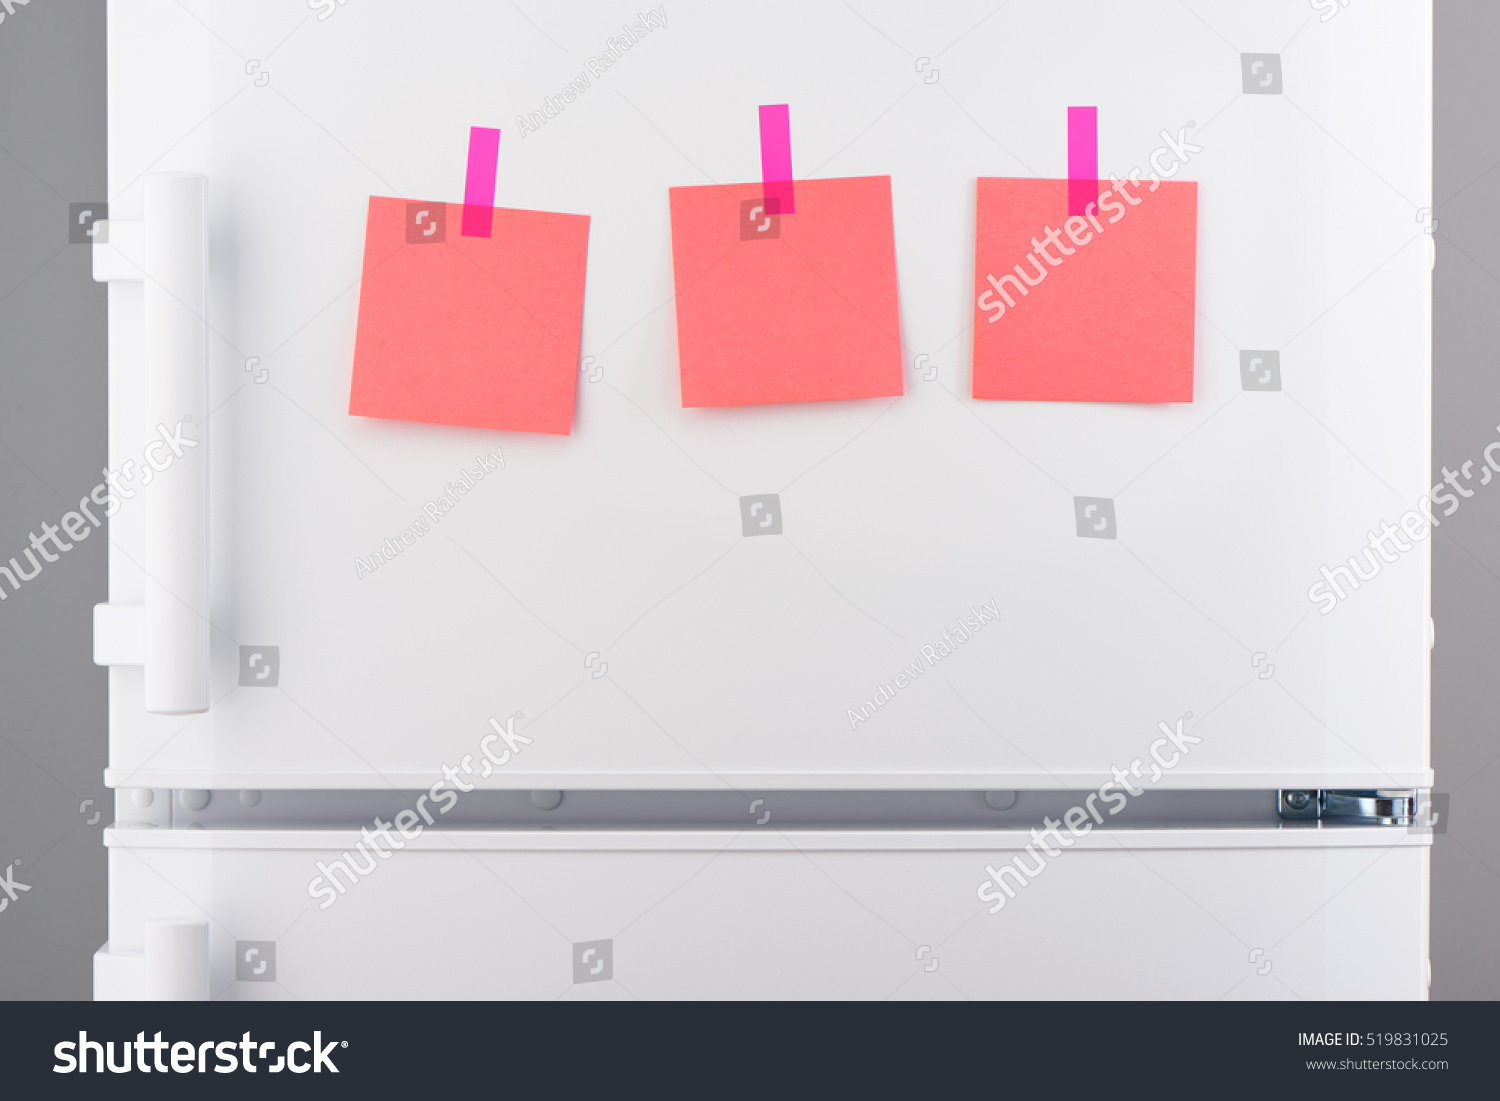 Three blank pink paper notes attached with pink stickers on white refrigerator door #519831025